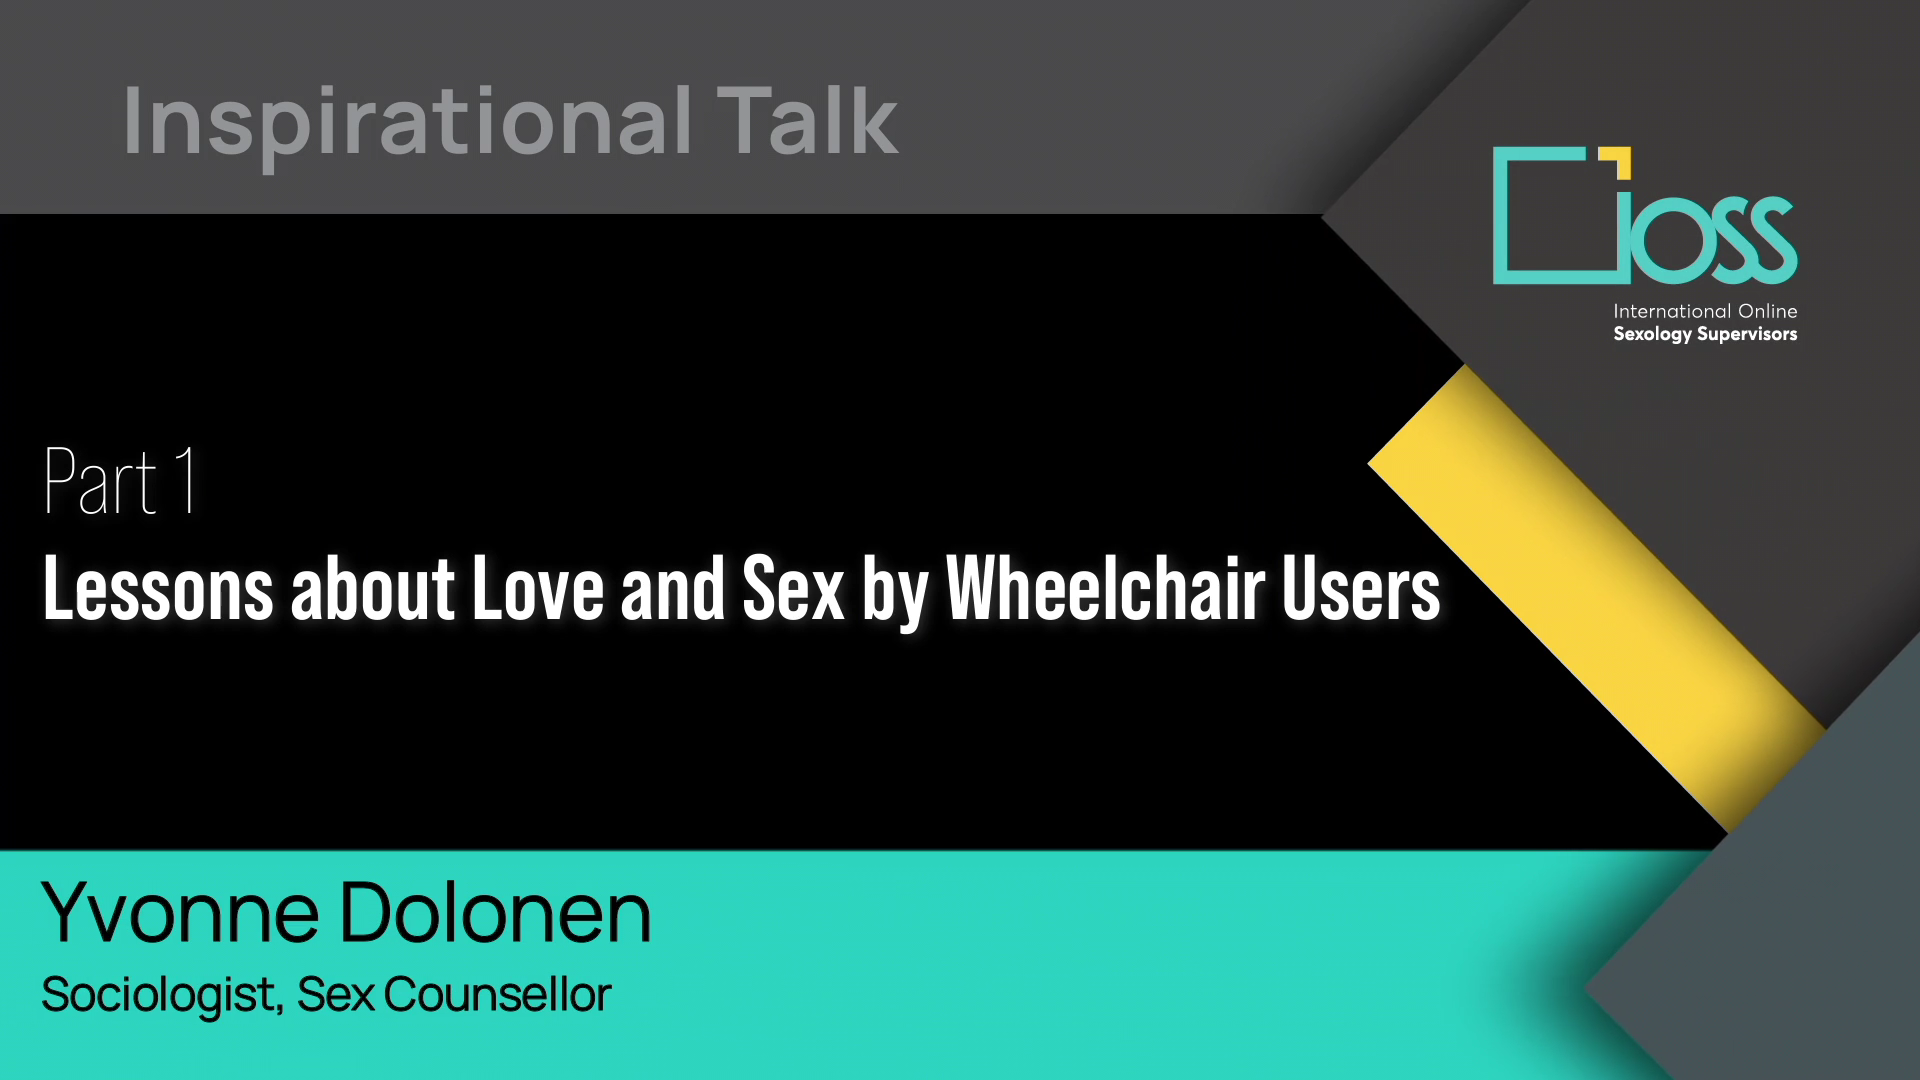 Part 1 Lessons about Love and Sex by Wheelchair Users (Part 1 & 2)